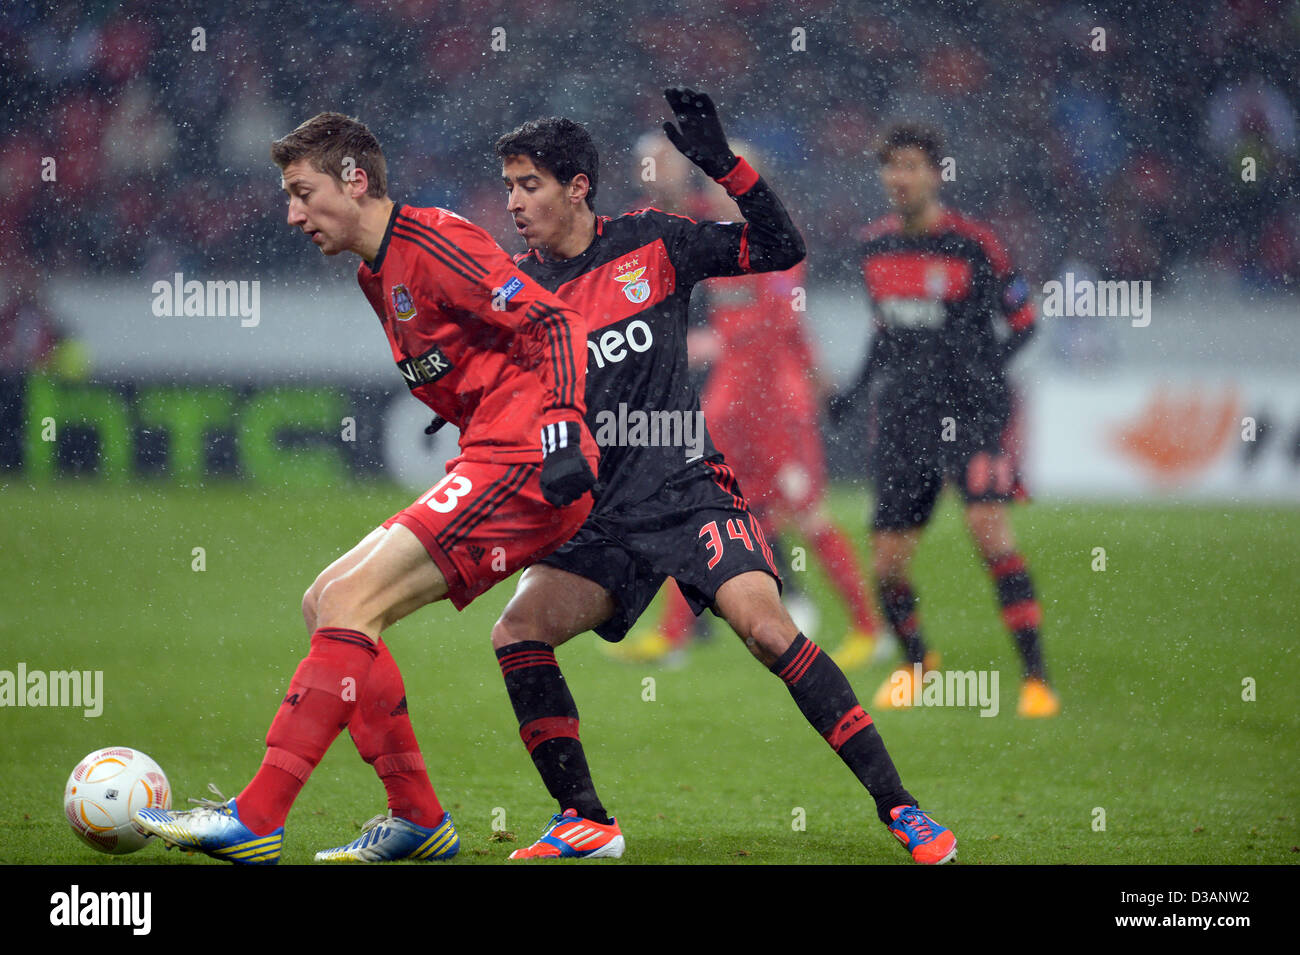 Leverkusen's Jens Hegeler (L) and Andre Almeida of Benfica vie for the ball during the UEFA Europa League round of 32 first leg soccer match between Bayer Leverkusen and Benfica Lisbon at at BayArena stadium in Leverkusen, Germany, 14 February 2013. Photo: Federico Gambarini/dpa Stock Photo